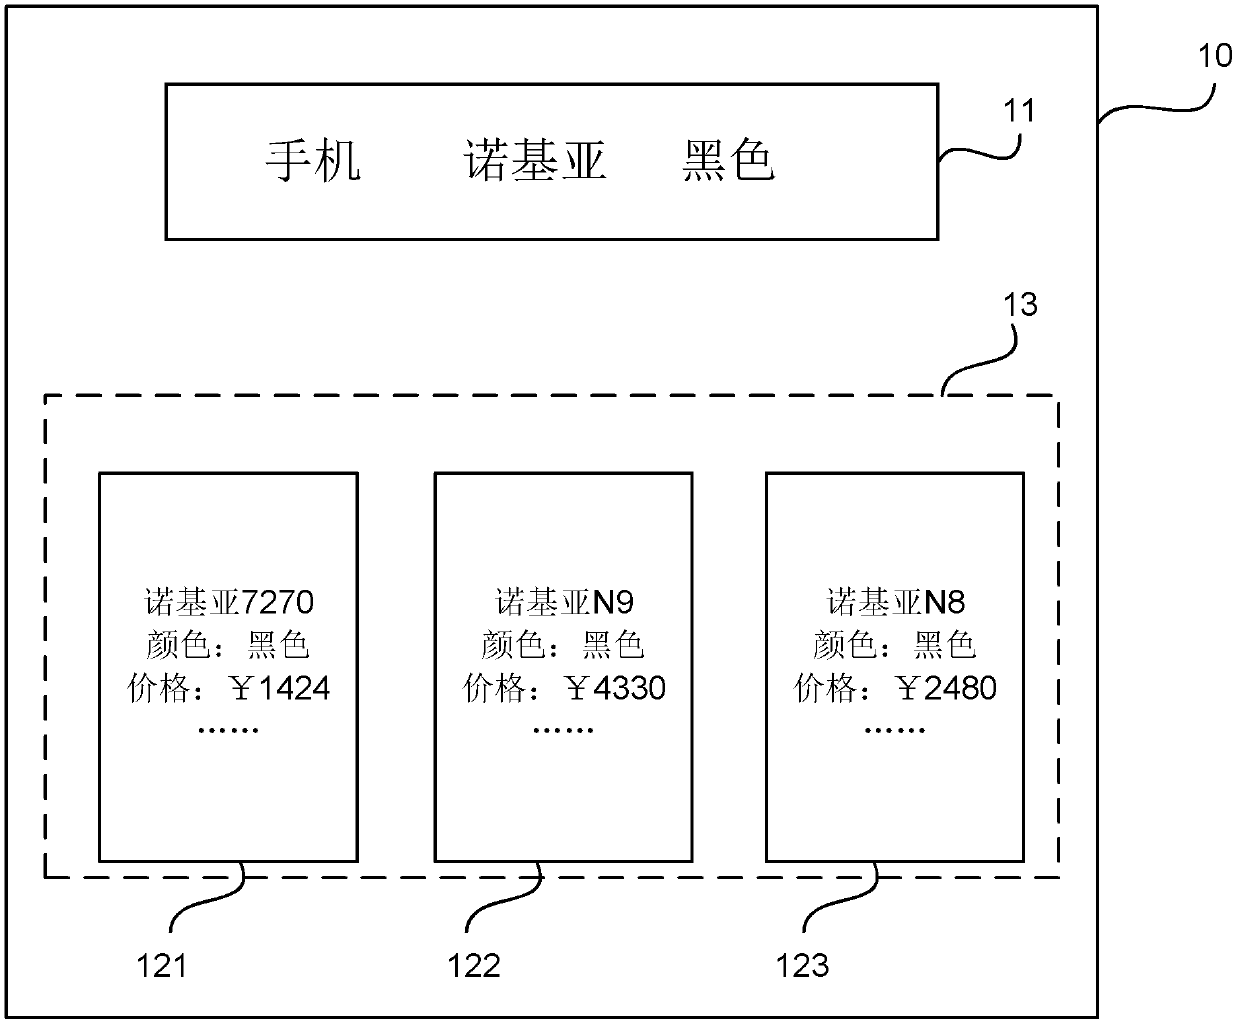 Method and system for recommending display keyword of data object